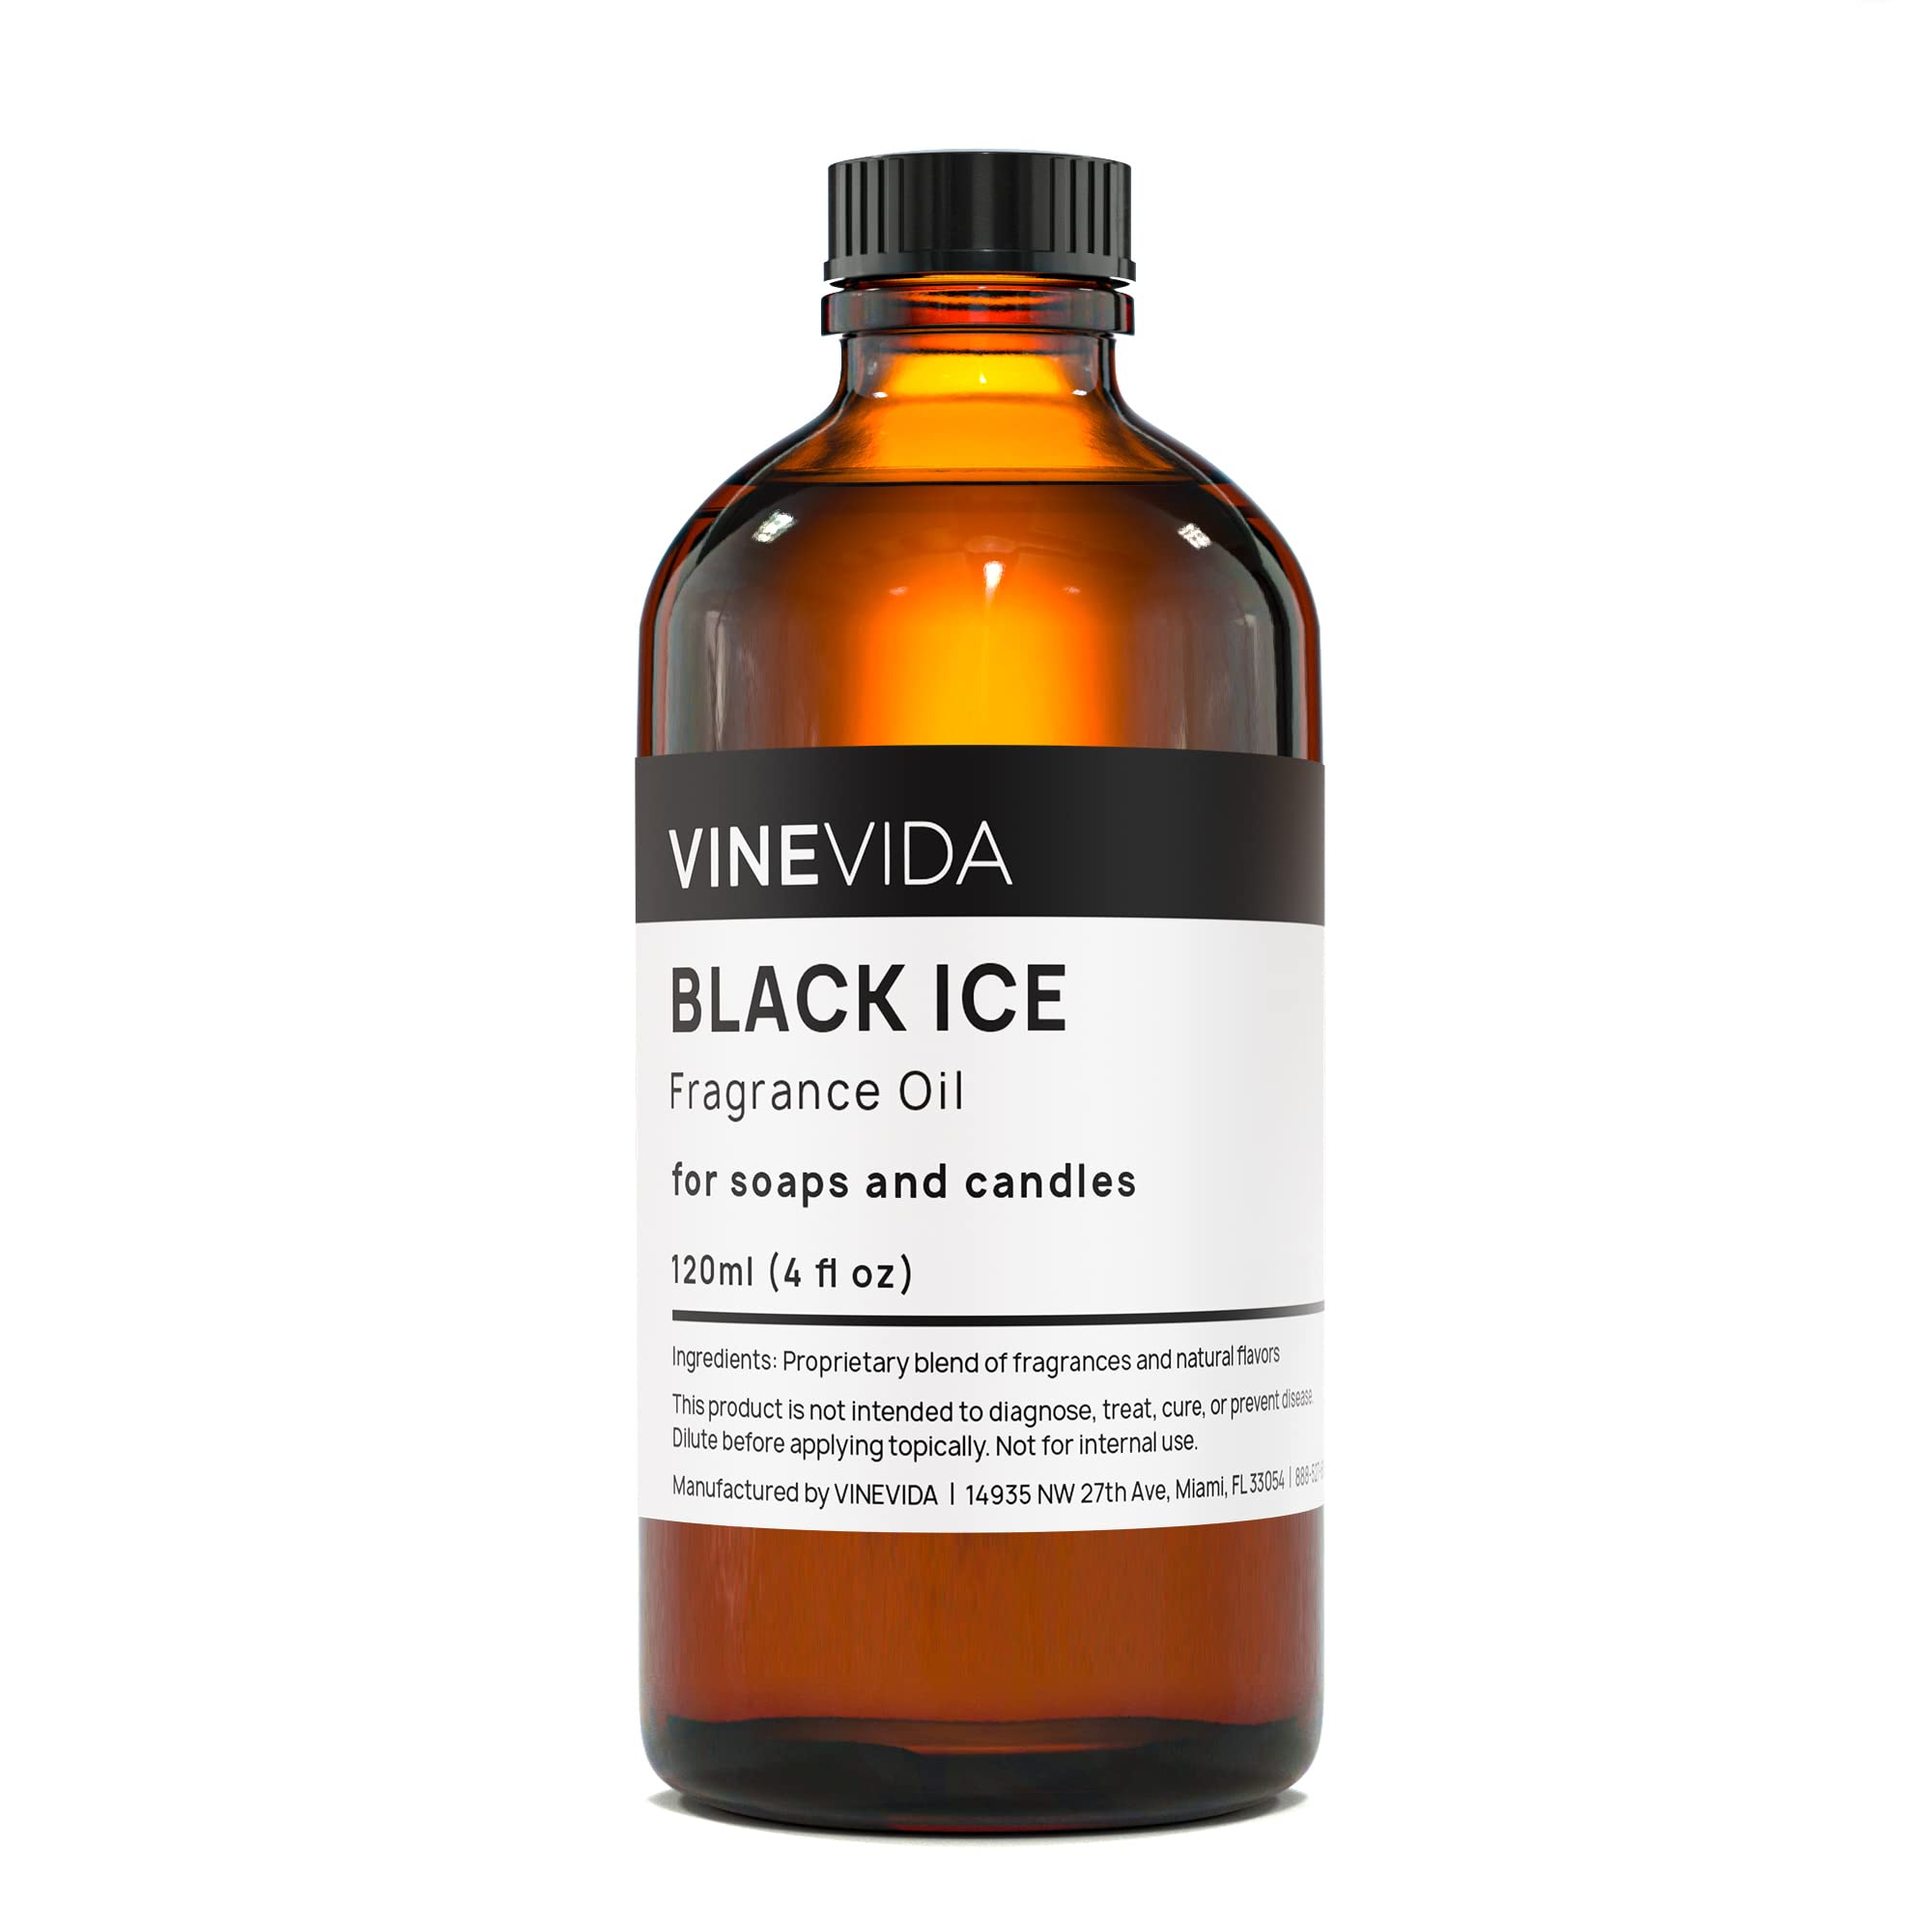  Black ICY Type Fragrance Oil (Our Version of The Brand